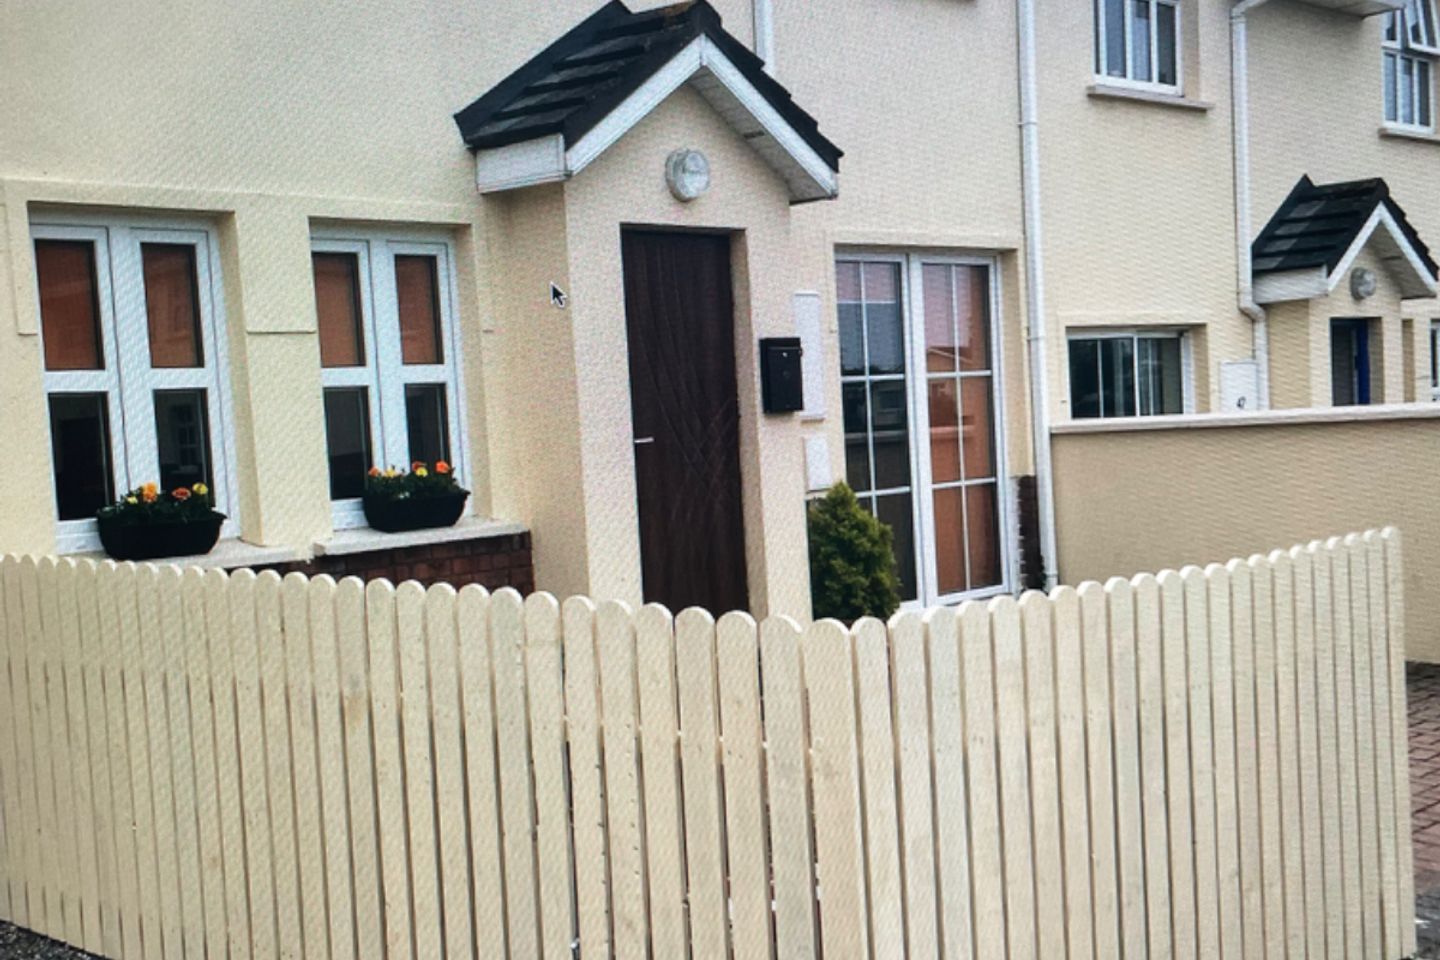 46 Seafield Old Crobally Road, Tramore, Co. Waterford